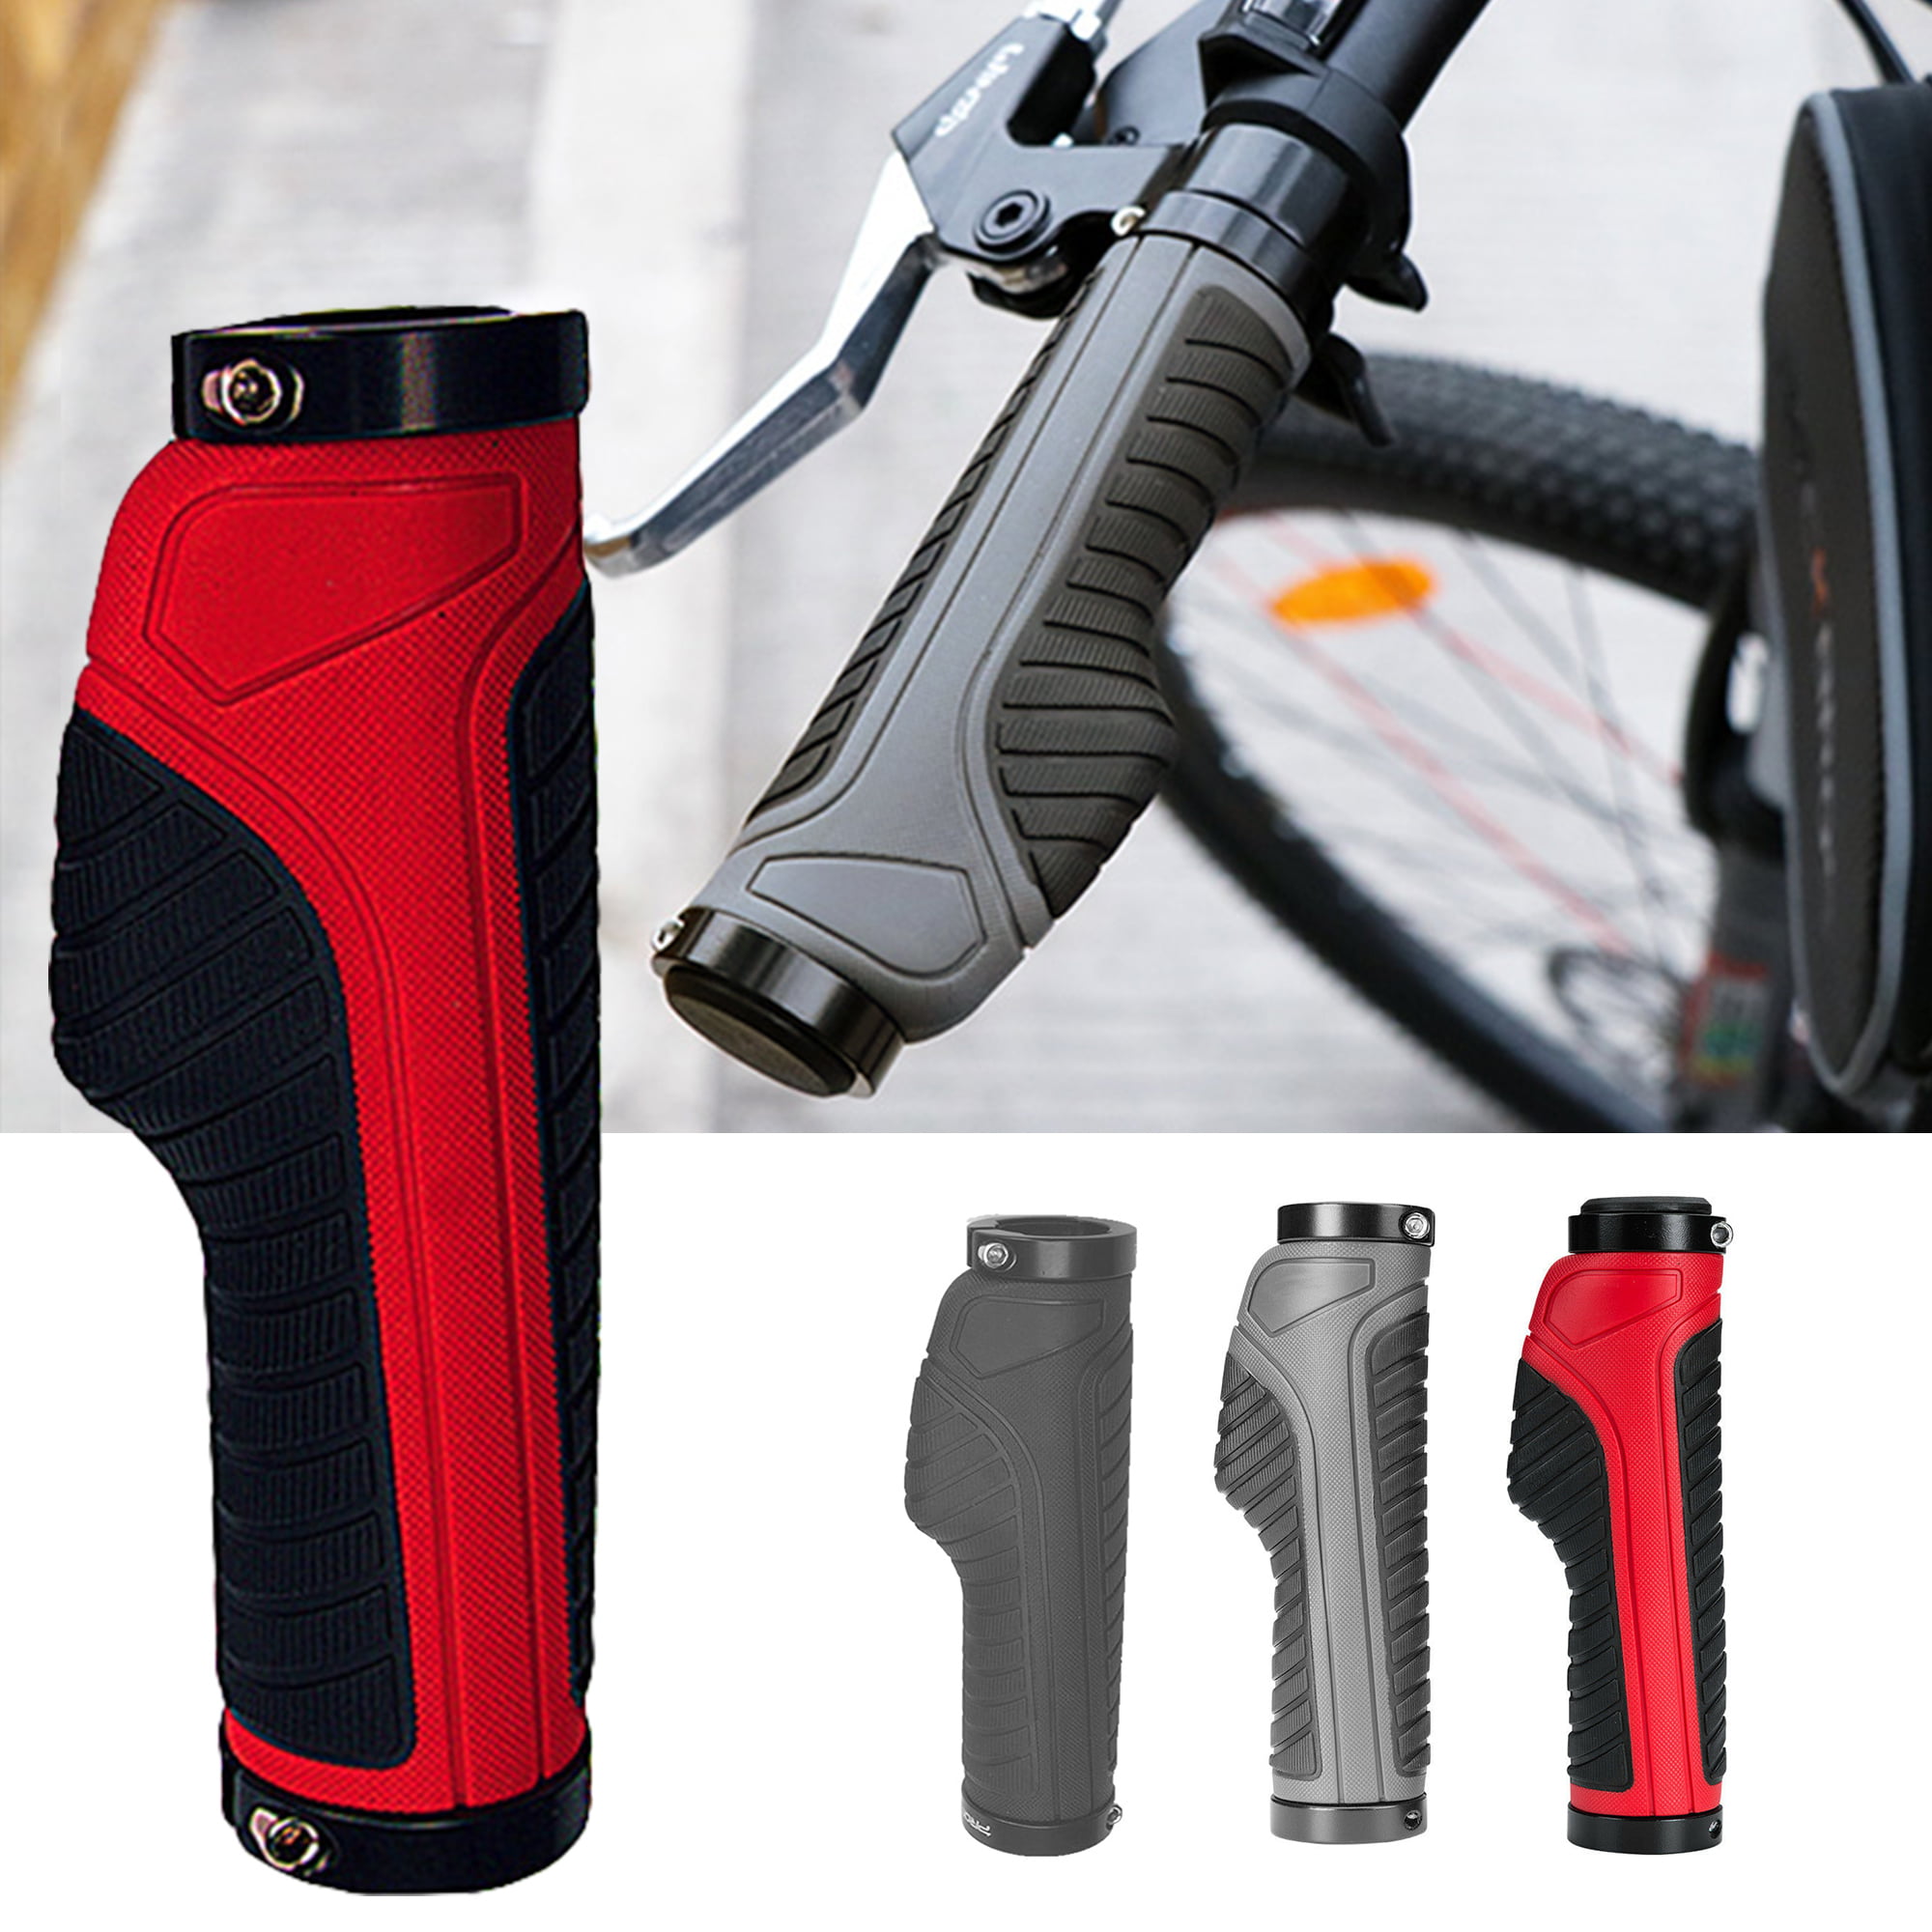 Details about  / Bicycle Handlebars Grip Ergonomic Anti-skid Comfortable Bar Ends MTB Accessories